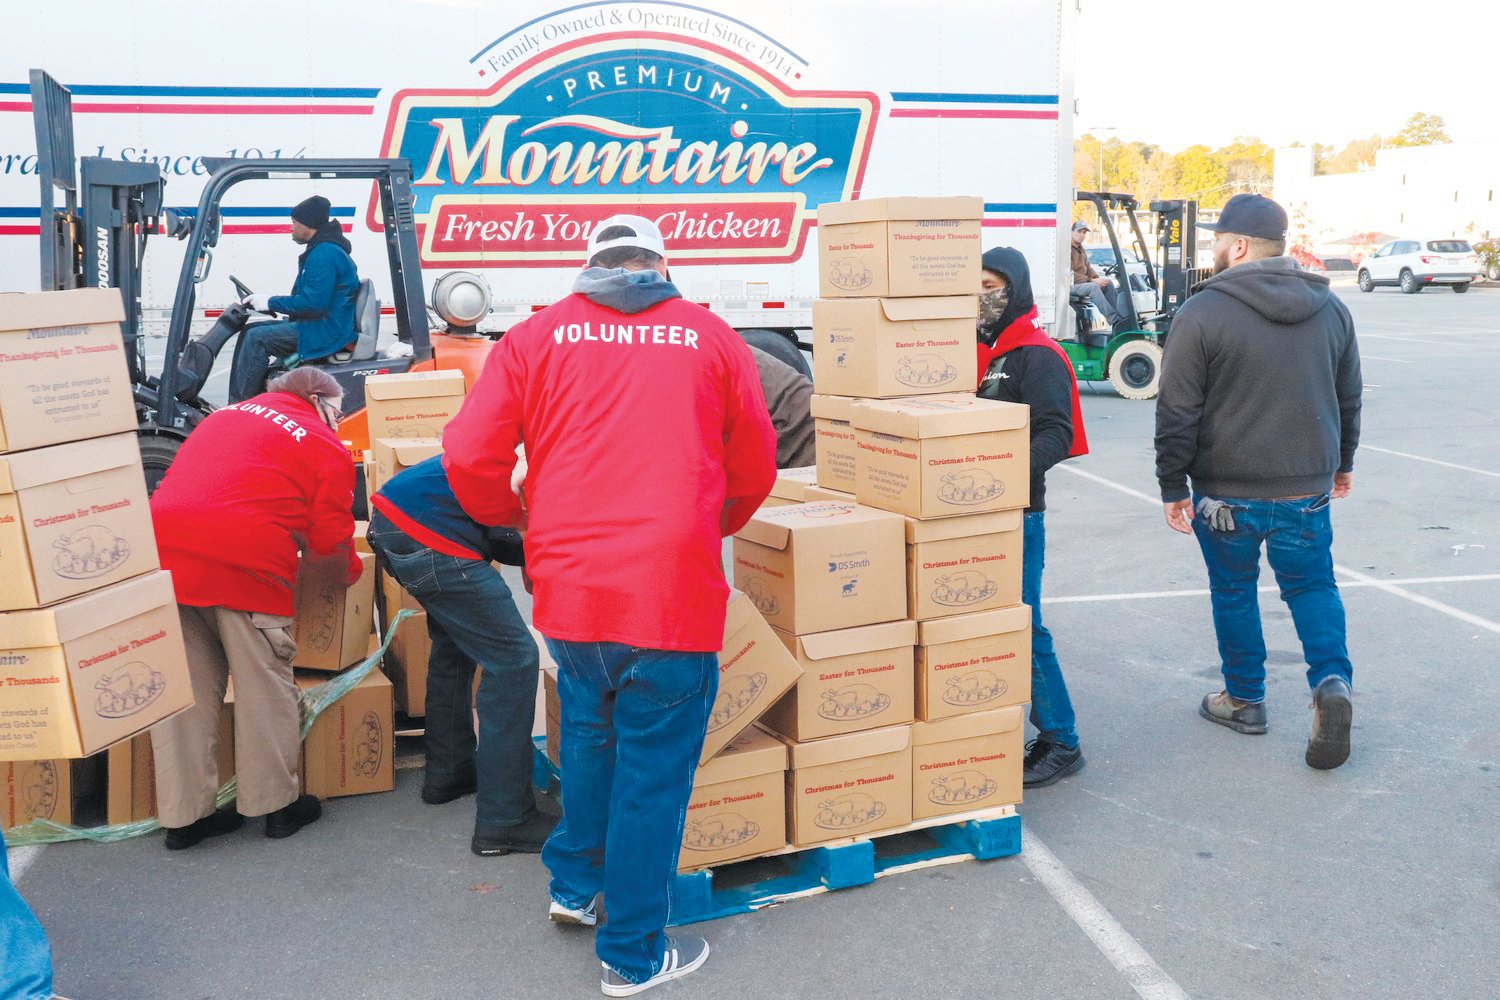 In this photos taken during last year's 'Thanksgiving for Thousands' event at Mountaire, employees and other volunteers worked to help distribute 5,000 boxes of food among churches and nonprofit organizations.